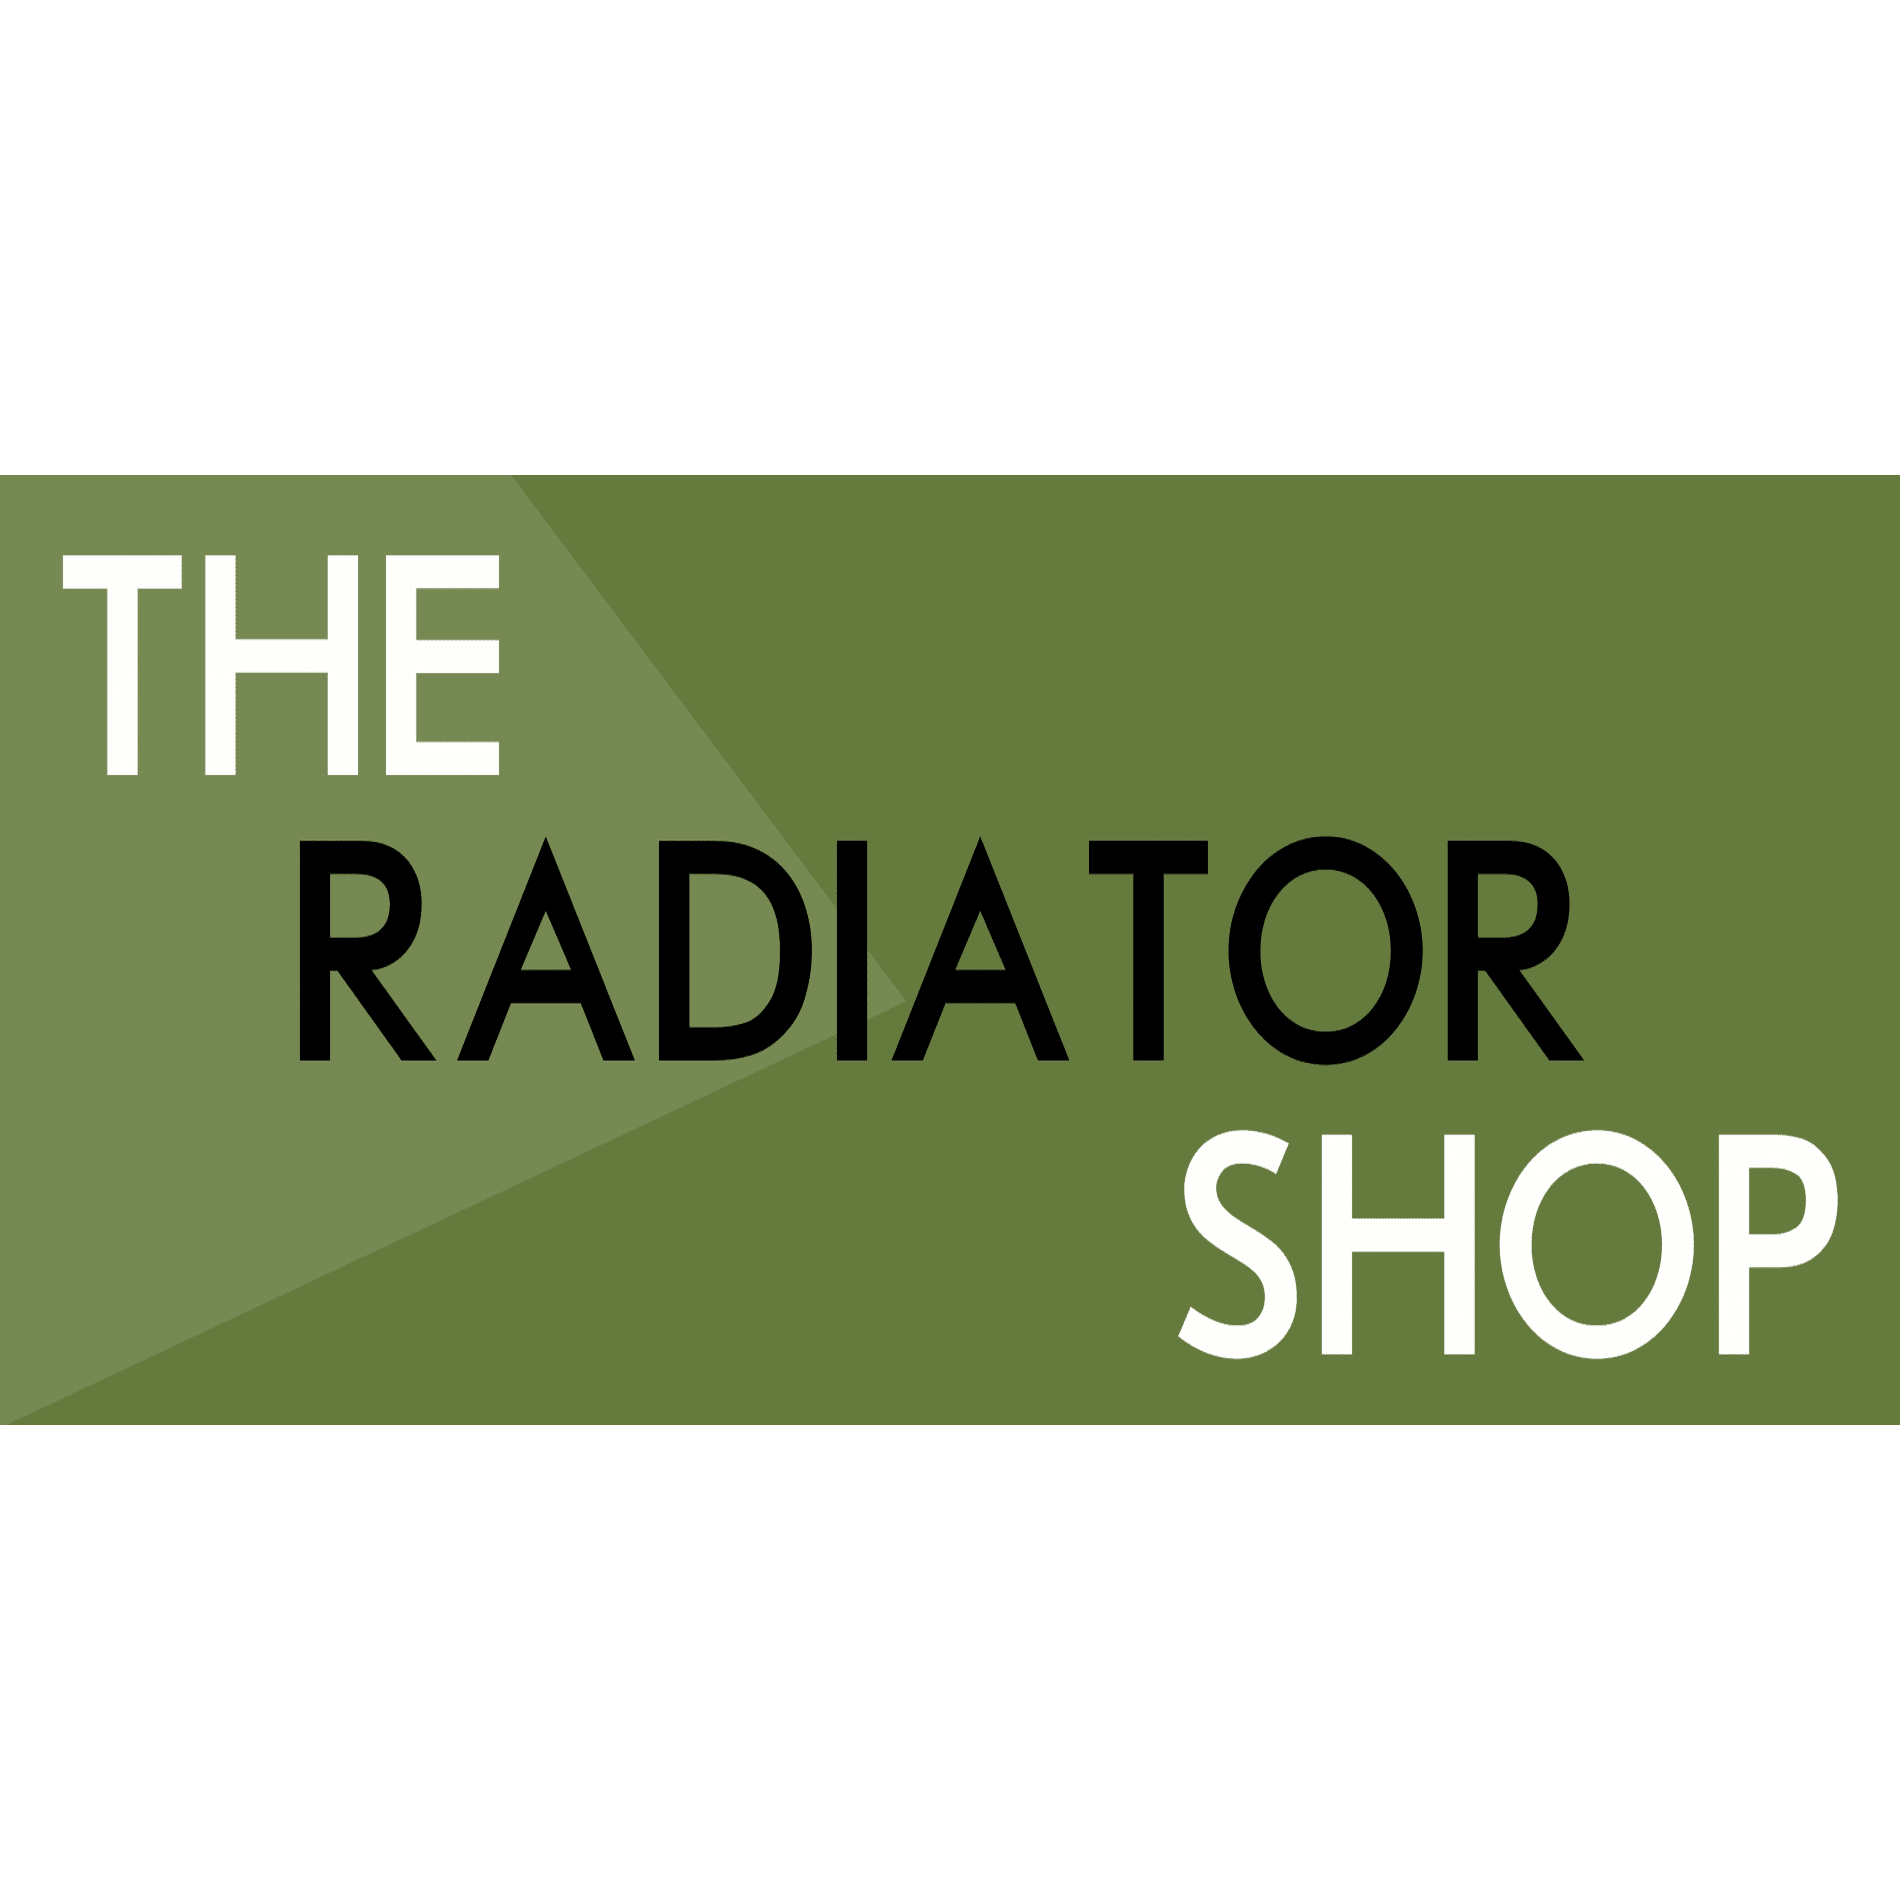 The Radiator Shop - Newtownards, County Down BT23 4YH - 02891 813460 | ShowMeLocal.com